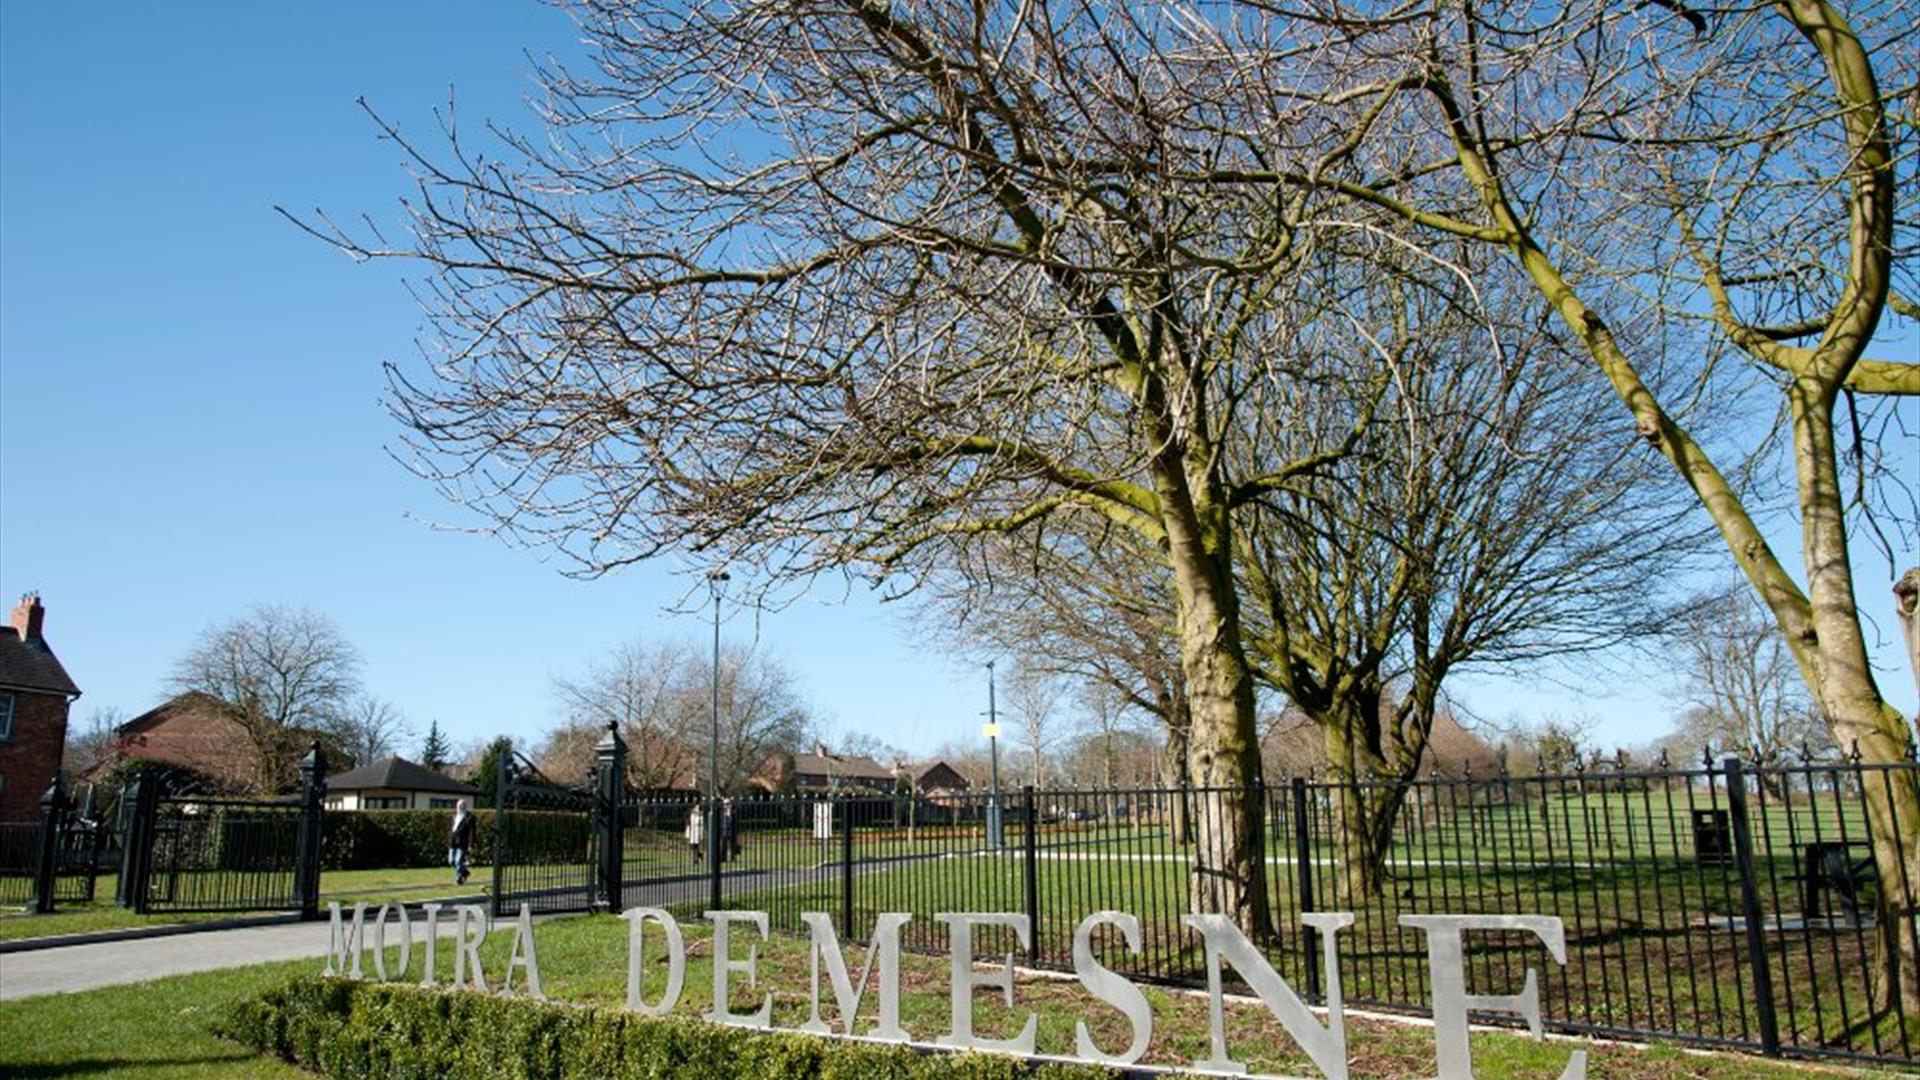 A view of Moira Demesne showing the signage